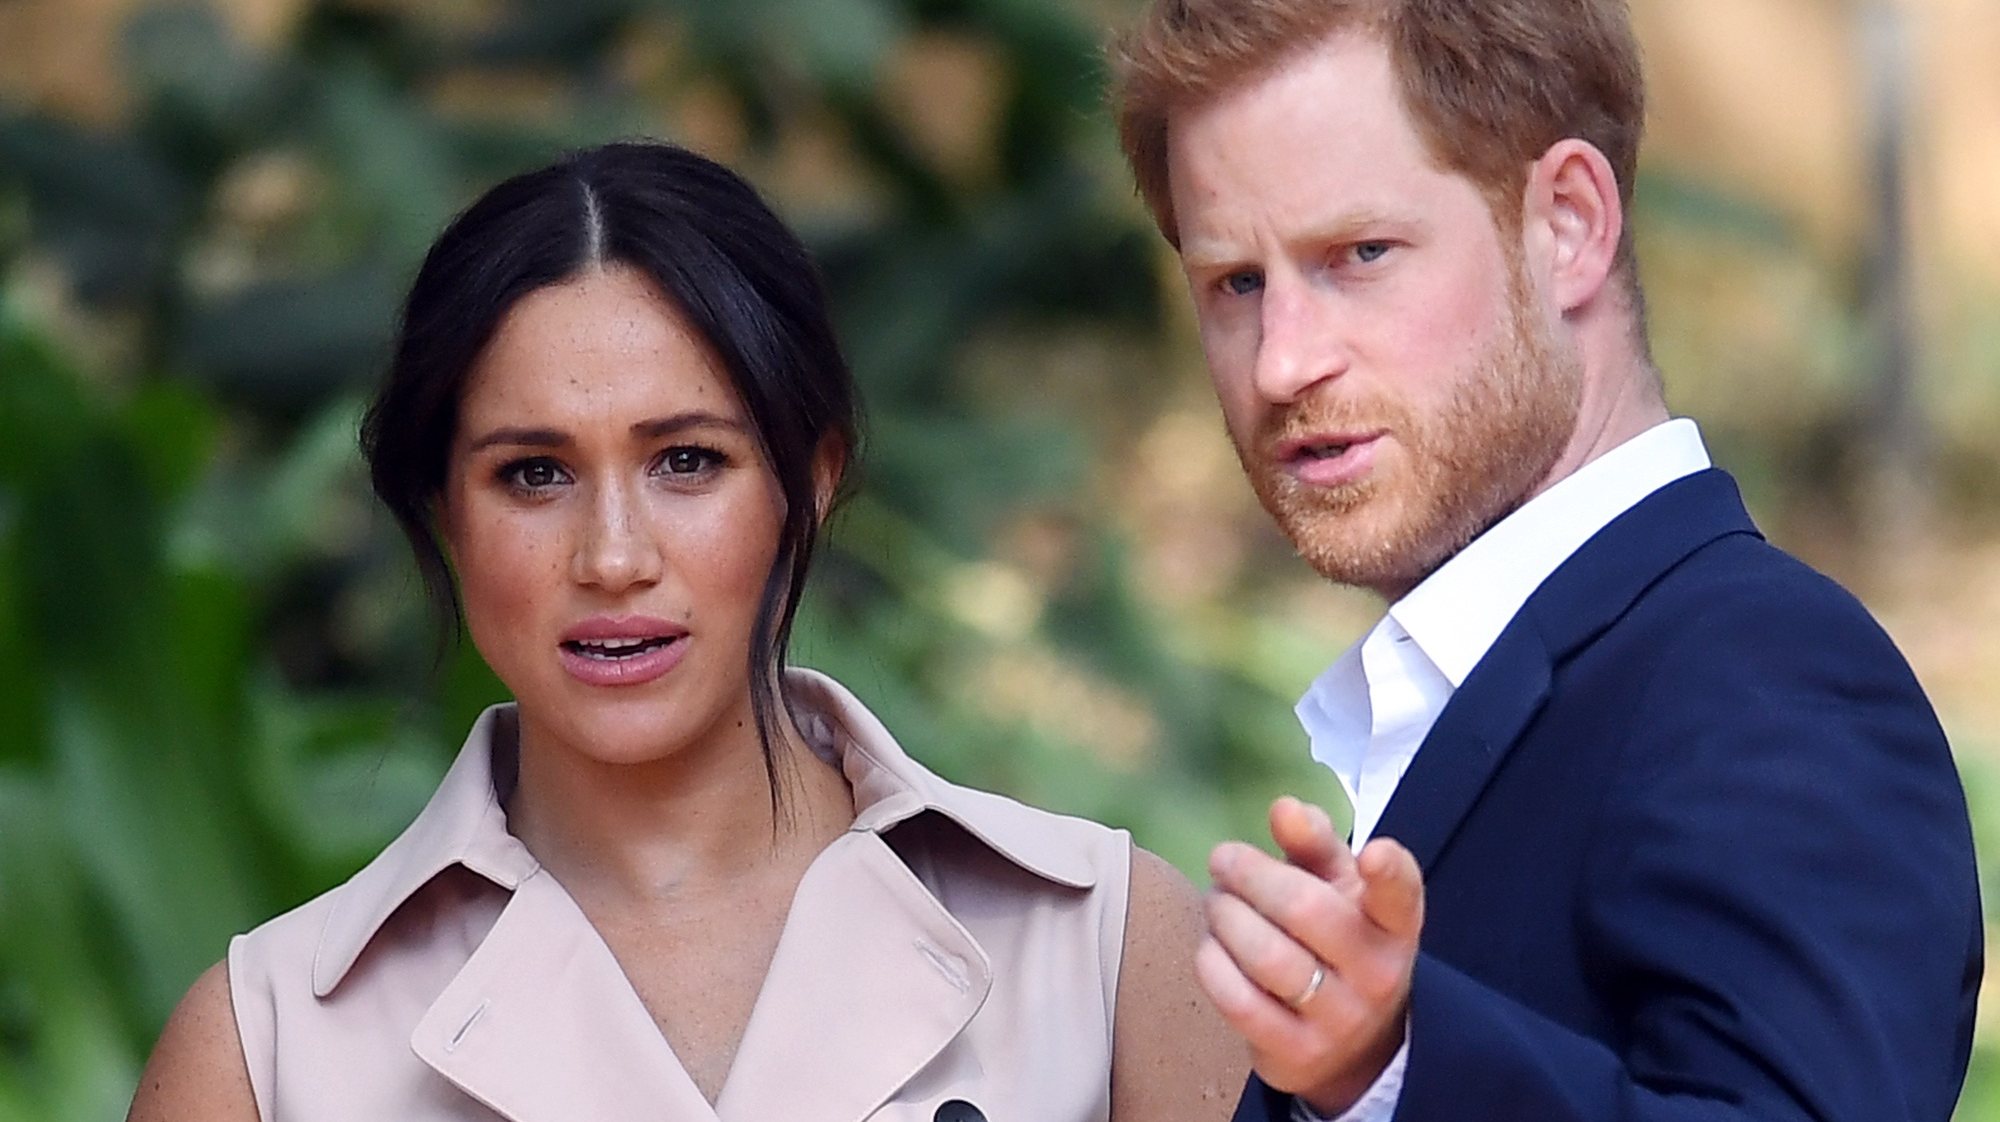 epa09055932 (FILE) - Britain&#039;s Prince Harry, Duke of Sussex (R) and his wife Meghan, Duchess of Sussex attend a creative industries and business reception at the High Commissioner&#039;s residence in Johannesburg, South Africa, 02 October 2019 (reissued 06 March 2021). US channel CBS will air an interview with Britain&#039;s Harry and Meghan, Duke and Duchess of Sussex on Sunday, 07 March.  EPA/FACUNDO ARRIZABALAGA *** Local Caption *** 56058870